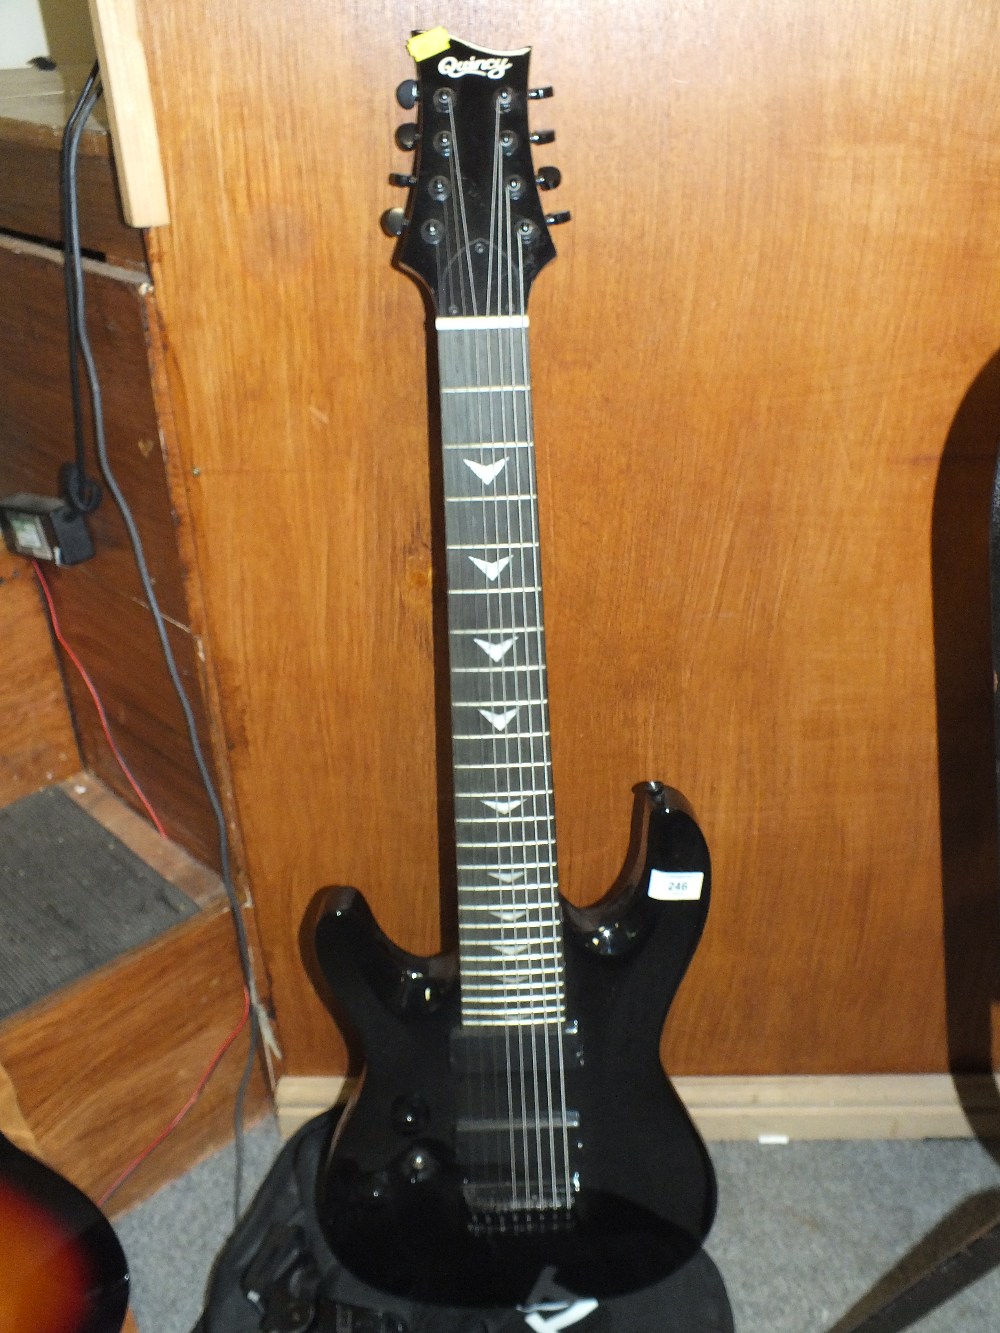 A QUINCY EIGHT STRING LEFT HANDED ELECTRIC GUITAR